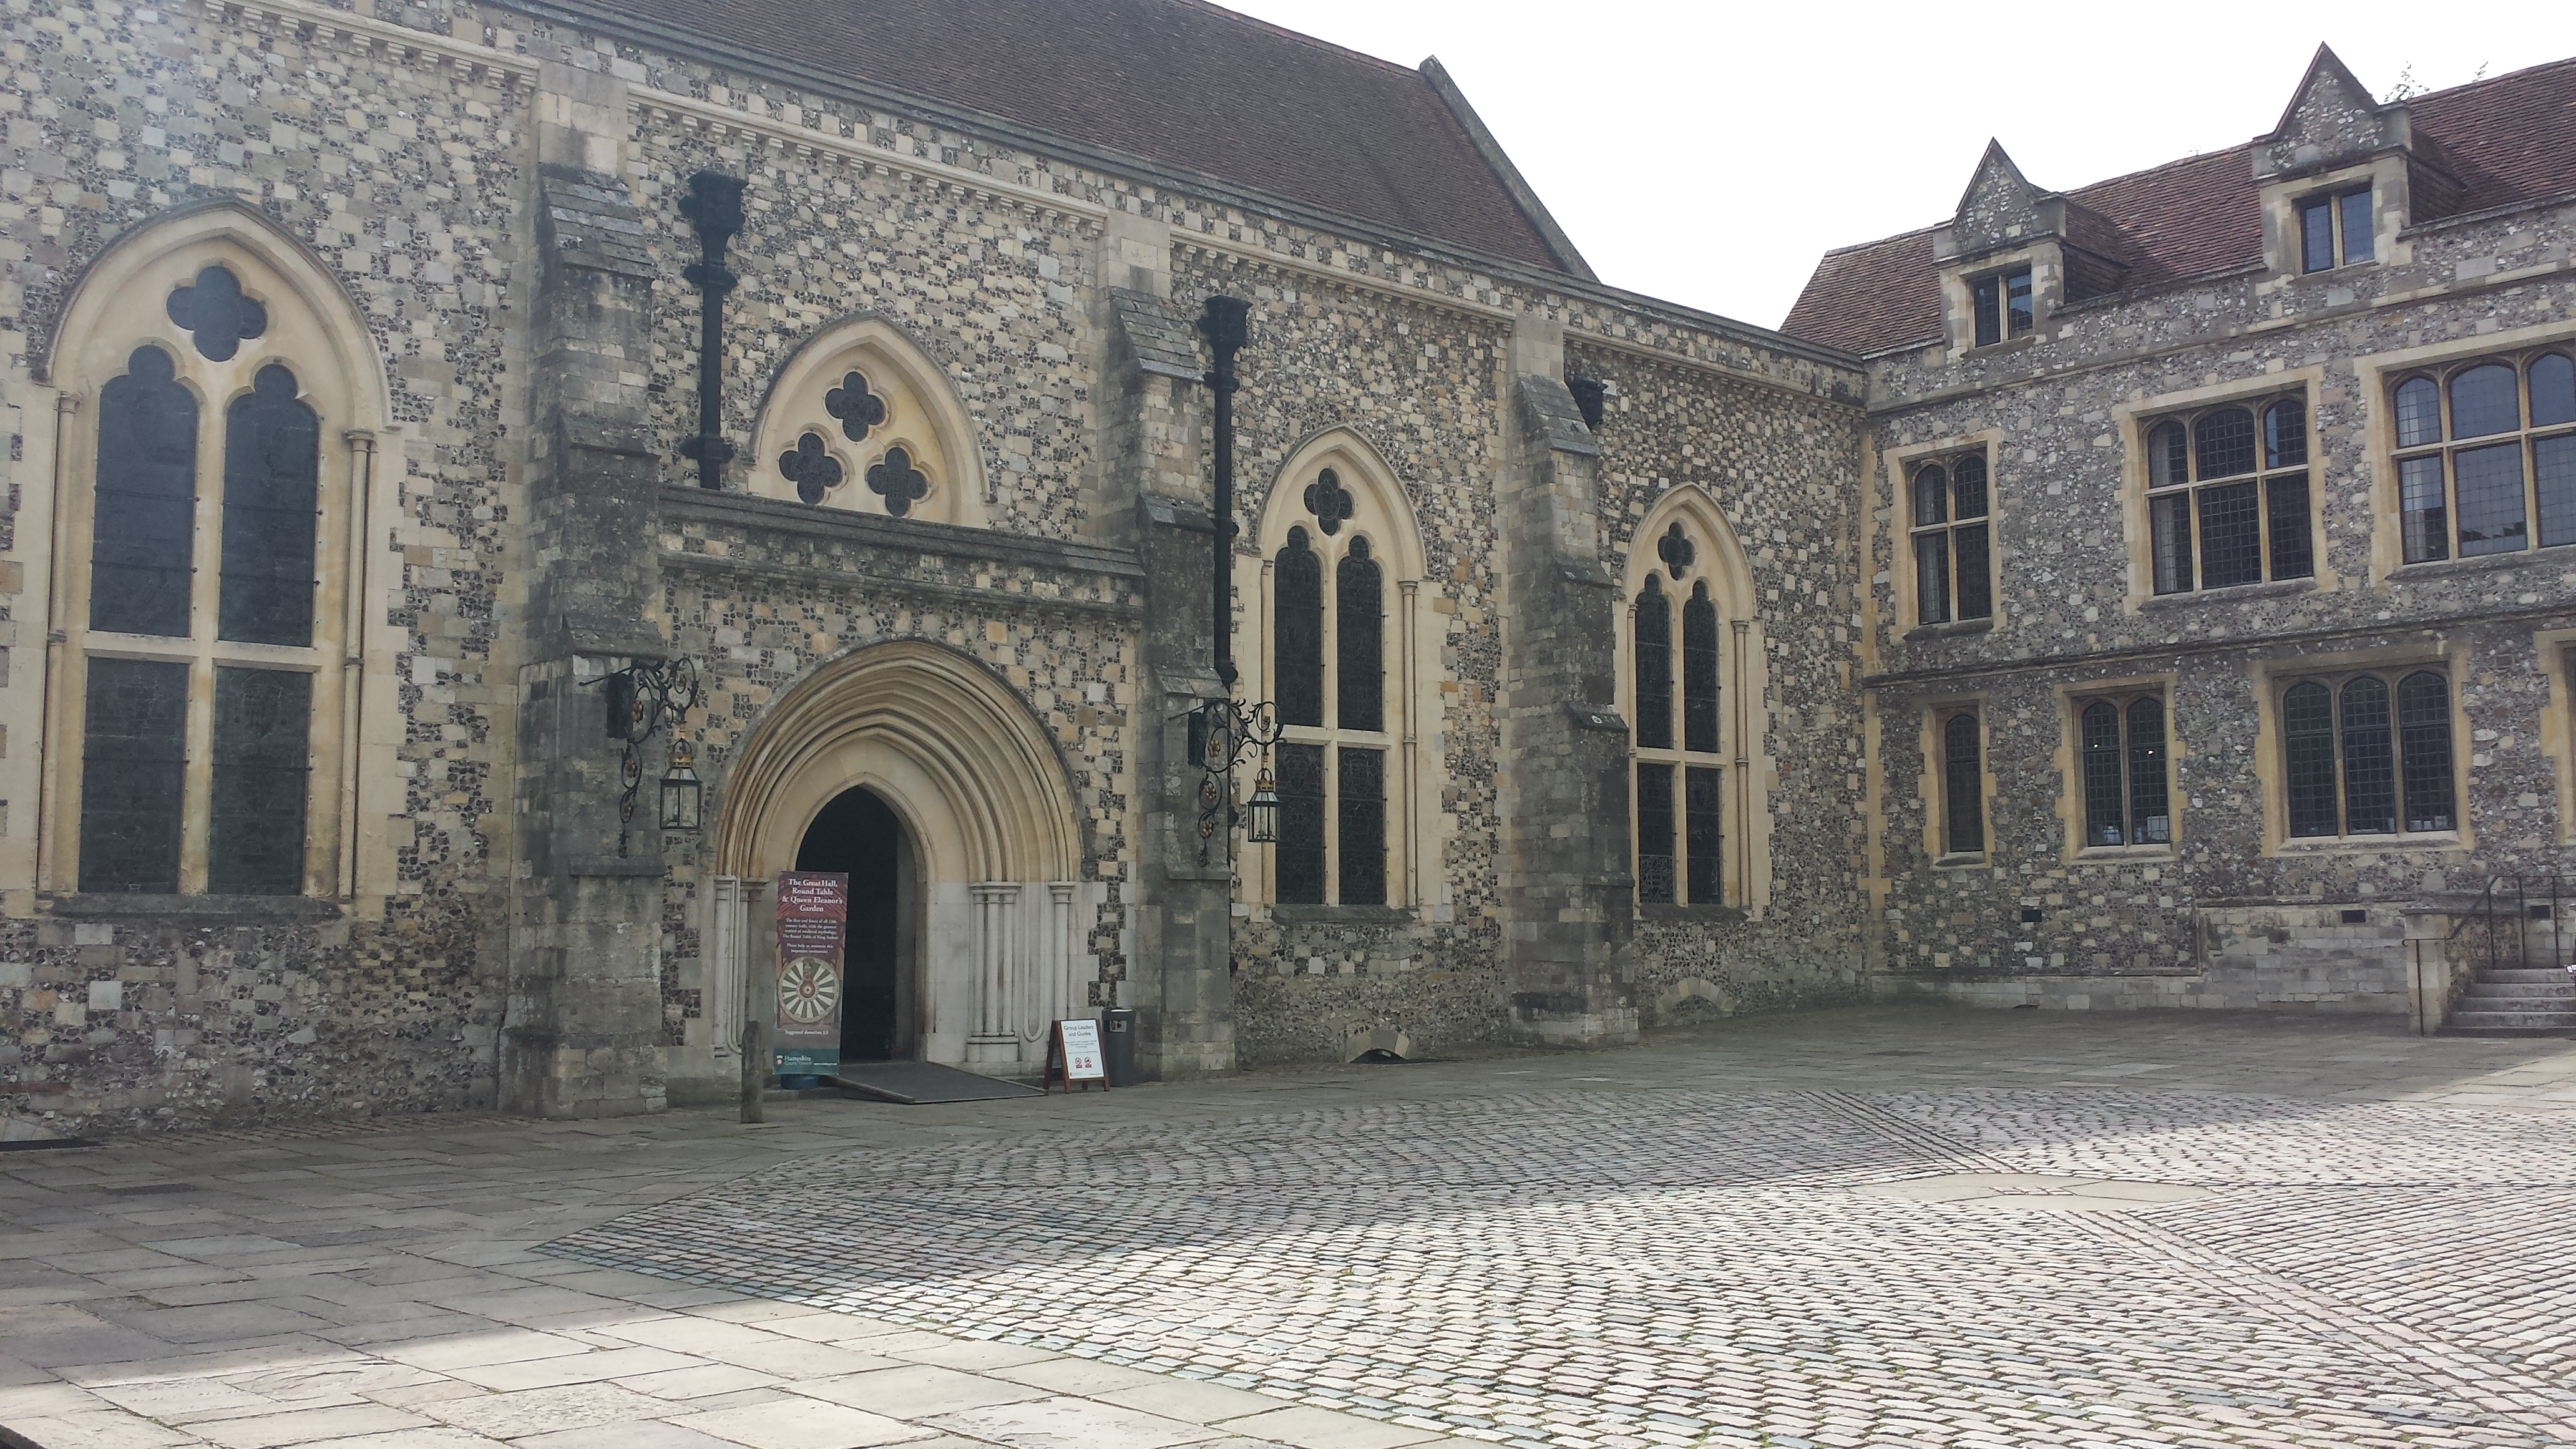 exterior of the Great Hall in winchester, a grey stone norman building with arched windows